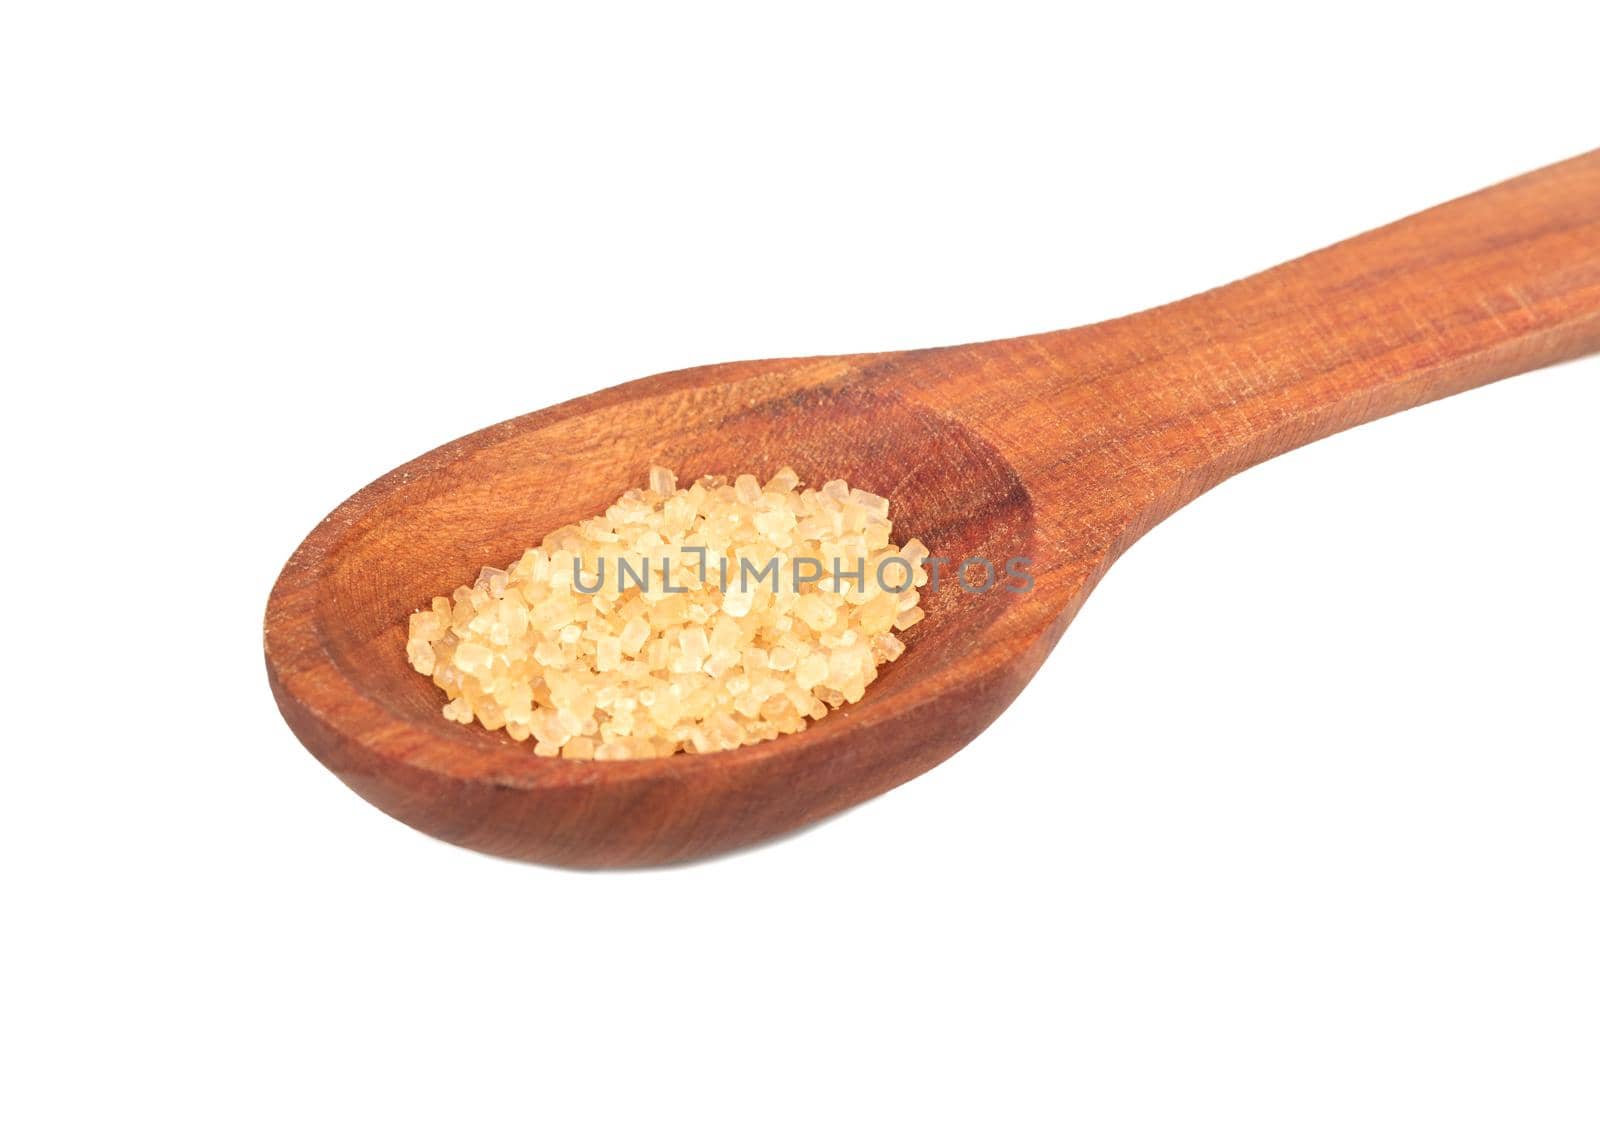 Wooden spoon with brown sugar on a white background